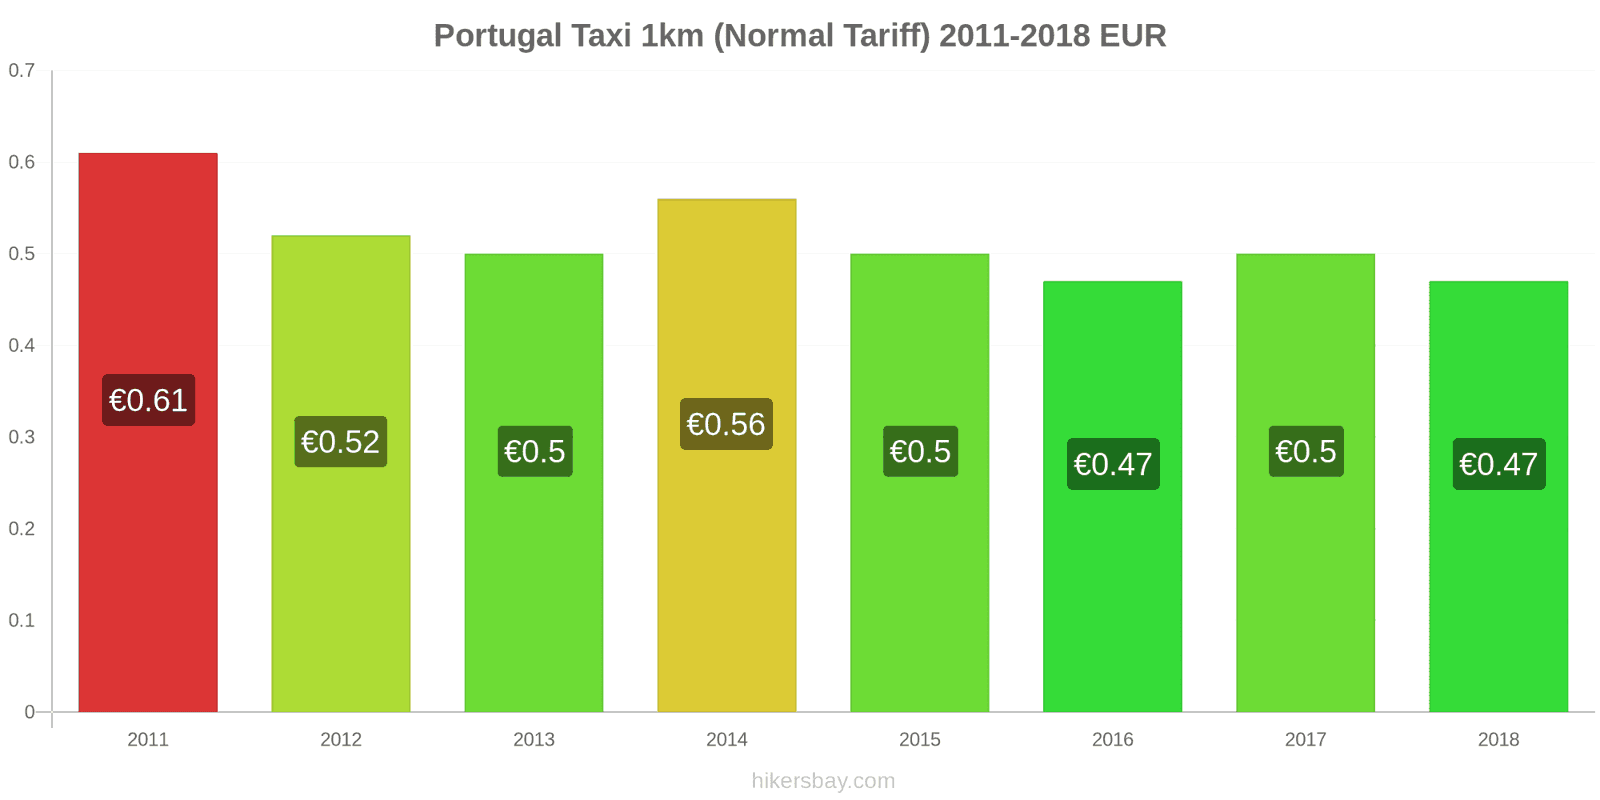 Portugal price changes Taxi 1km (Normal Tariff) hikersbay.com